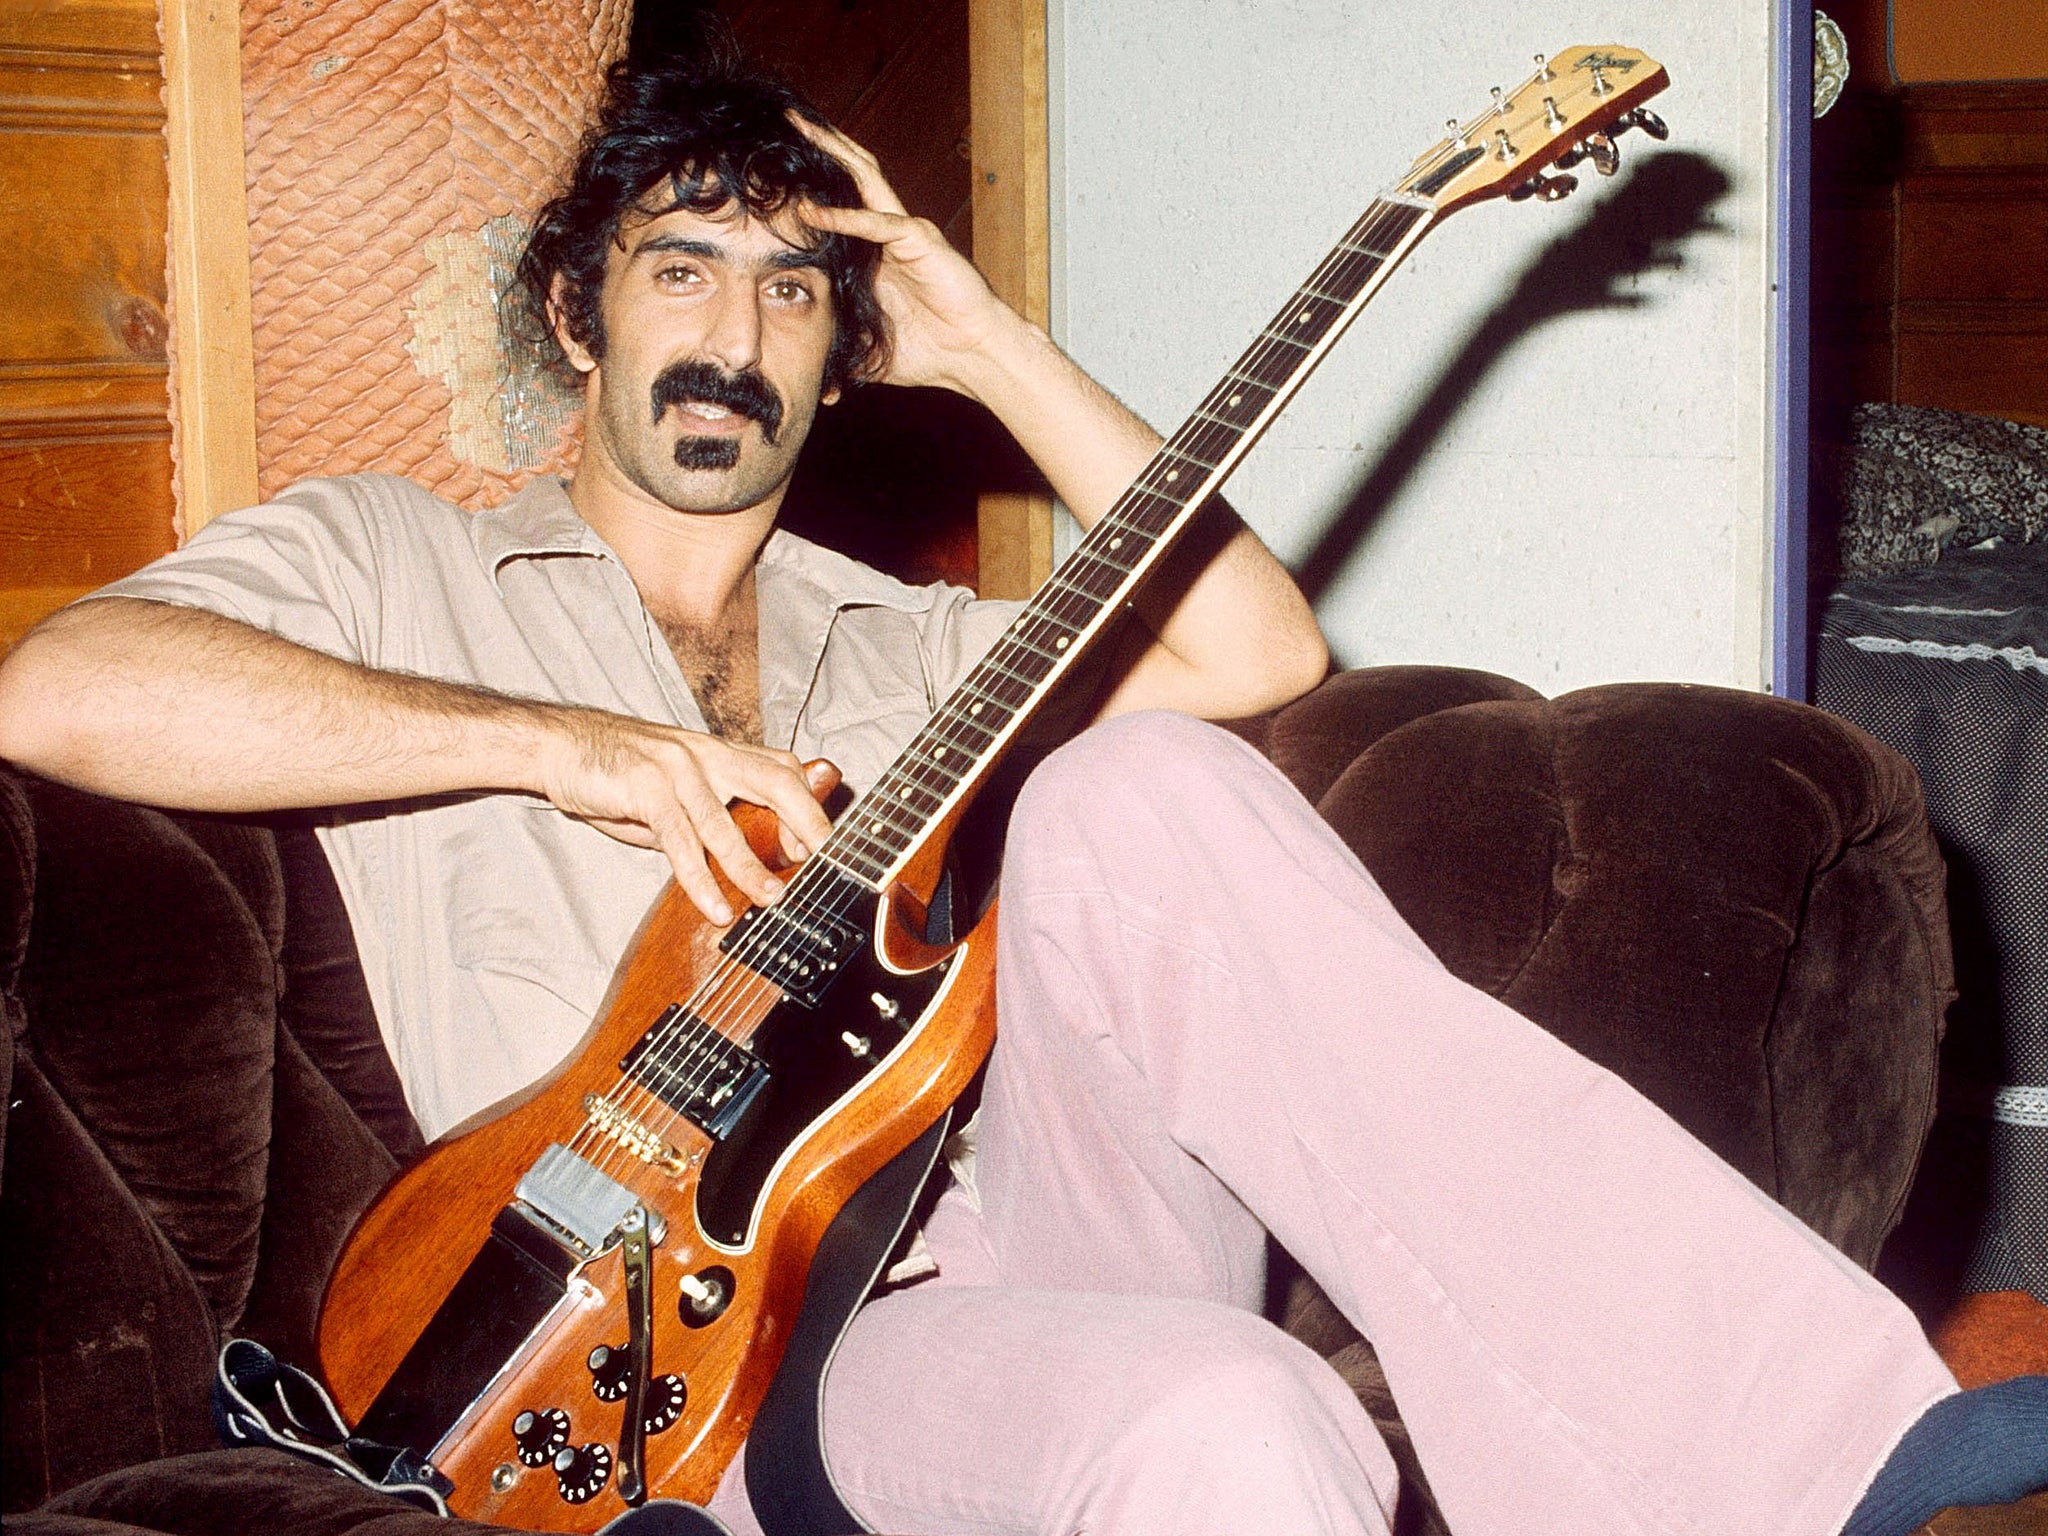 Frank Zappa, the one-off musician who could never be pigeonholed